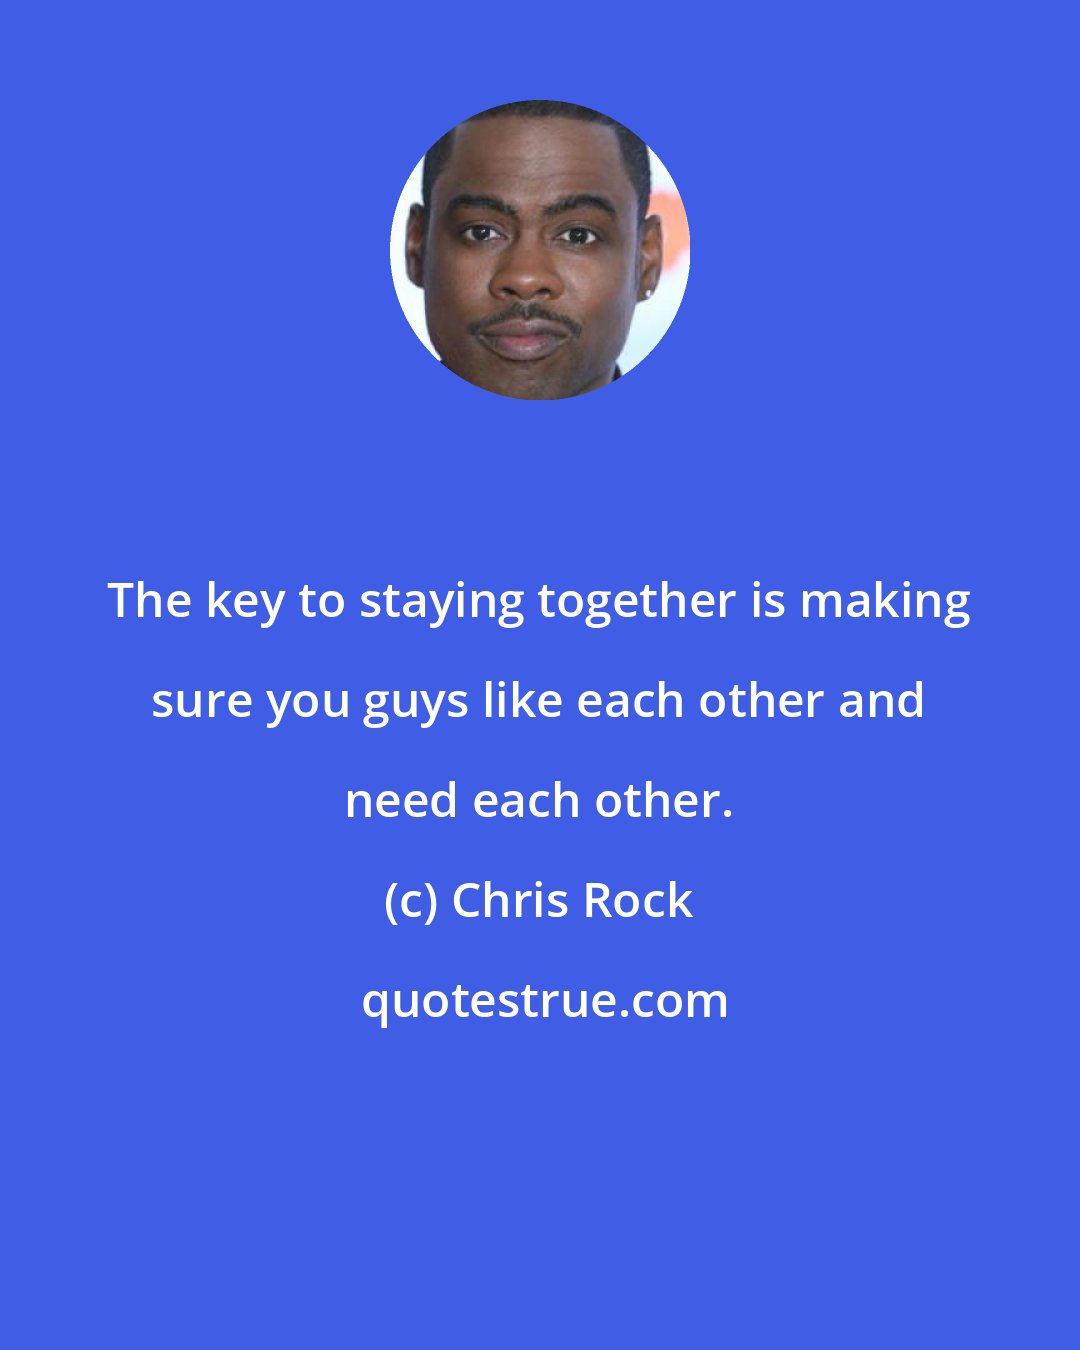 Chris Rock: The key to staying together is making sure you guys like each other and need each other.